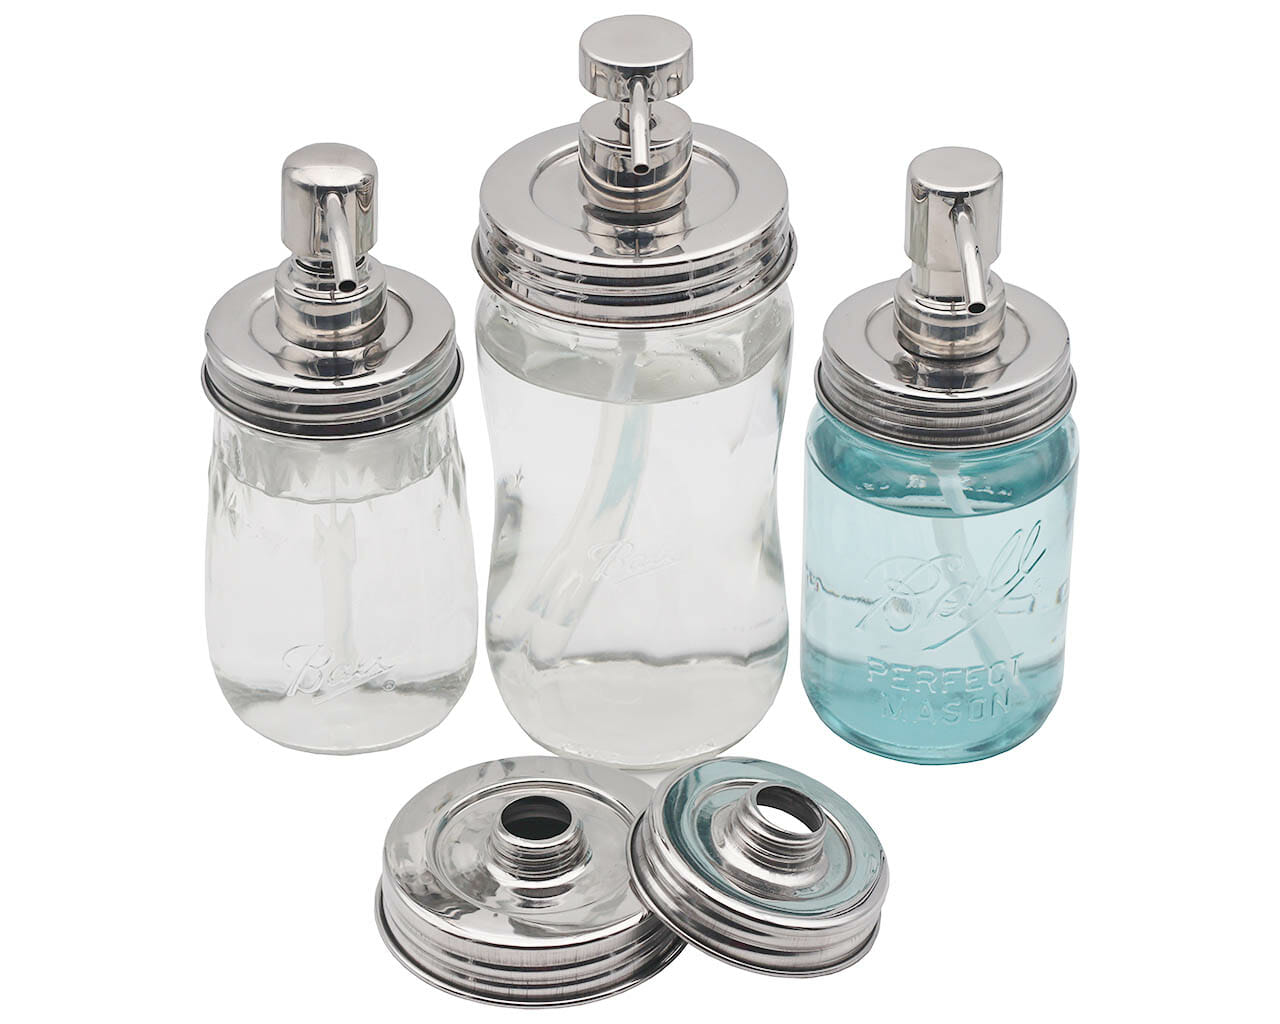 Threaded Mirror Chrome Soap Dispenser Lid for Wide and Regular Mouth Mason Jars